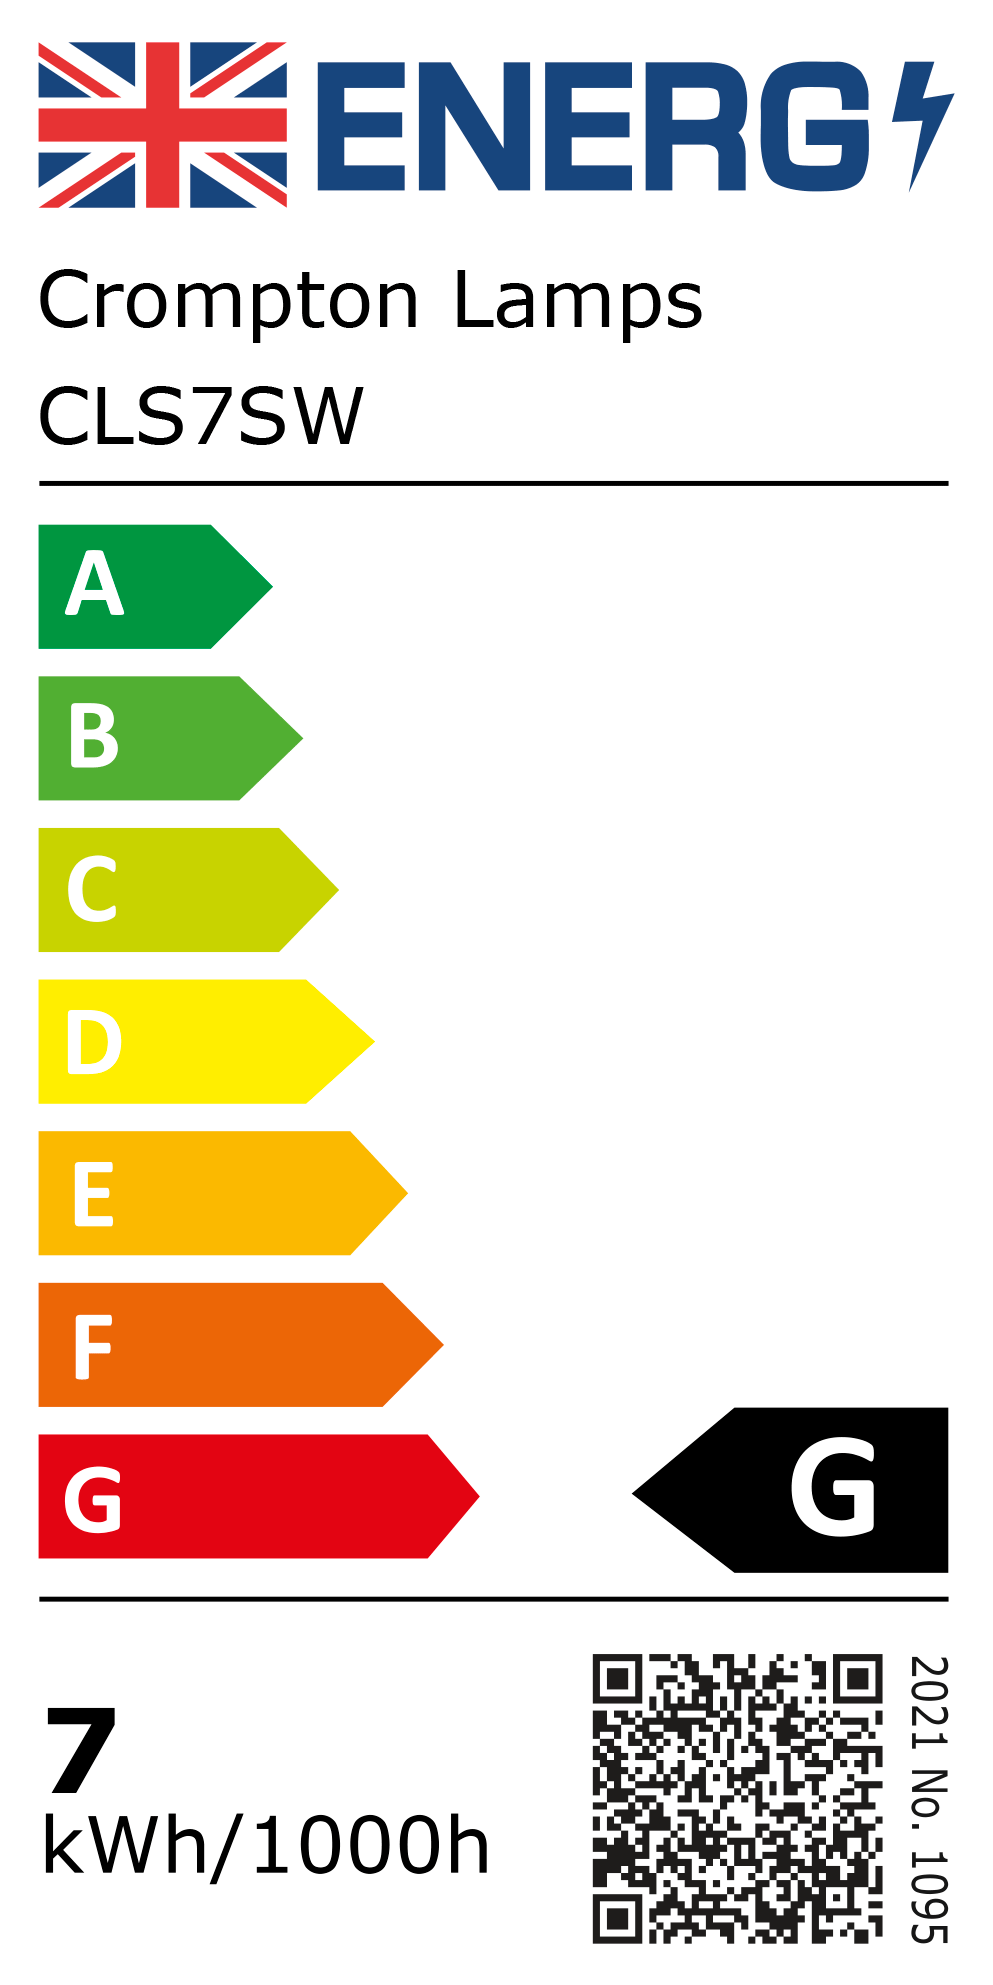 New 2021 Energy Rating Label: Stock Code CLS7SW